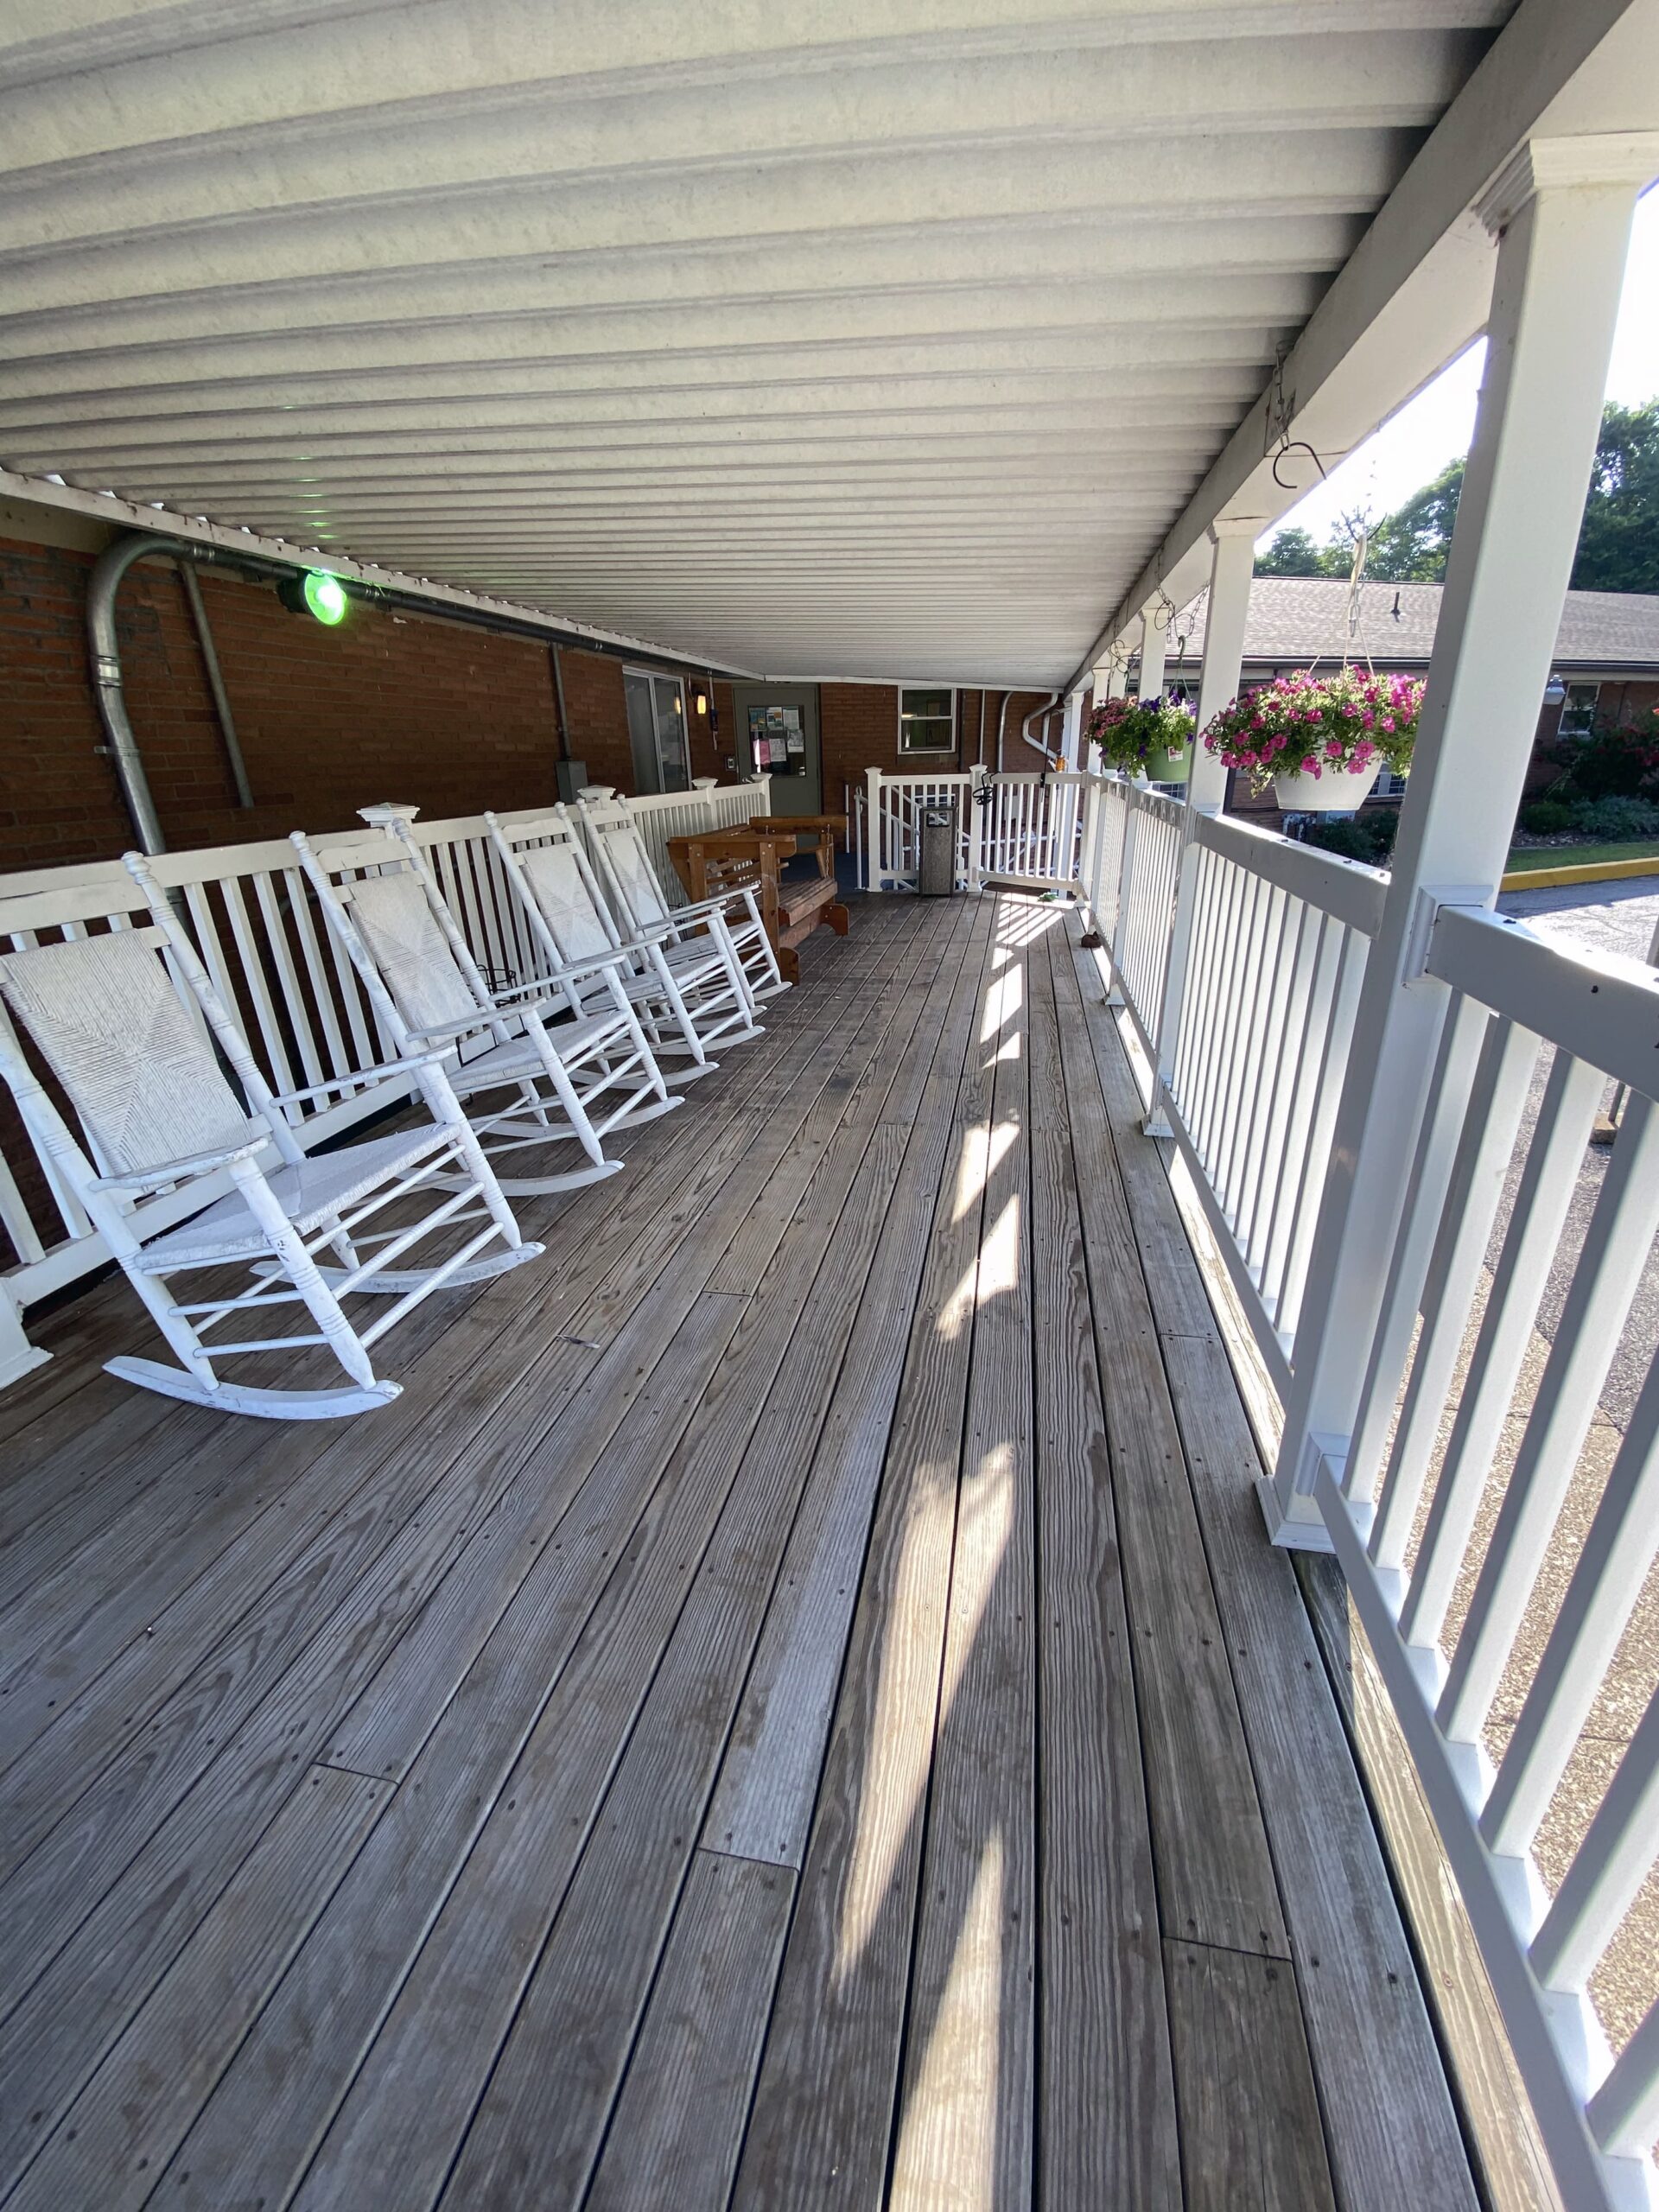 Brickyard Healthcare Lincoln Hills Care Center exterior porch with rocking chairs